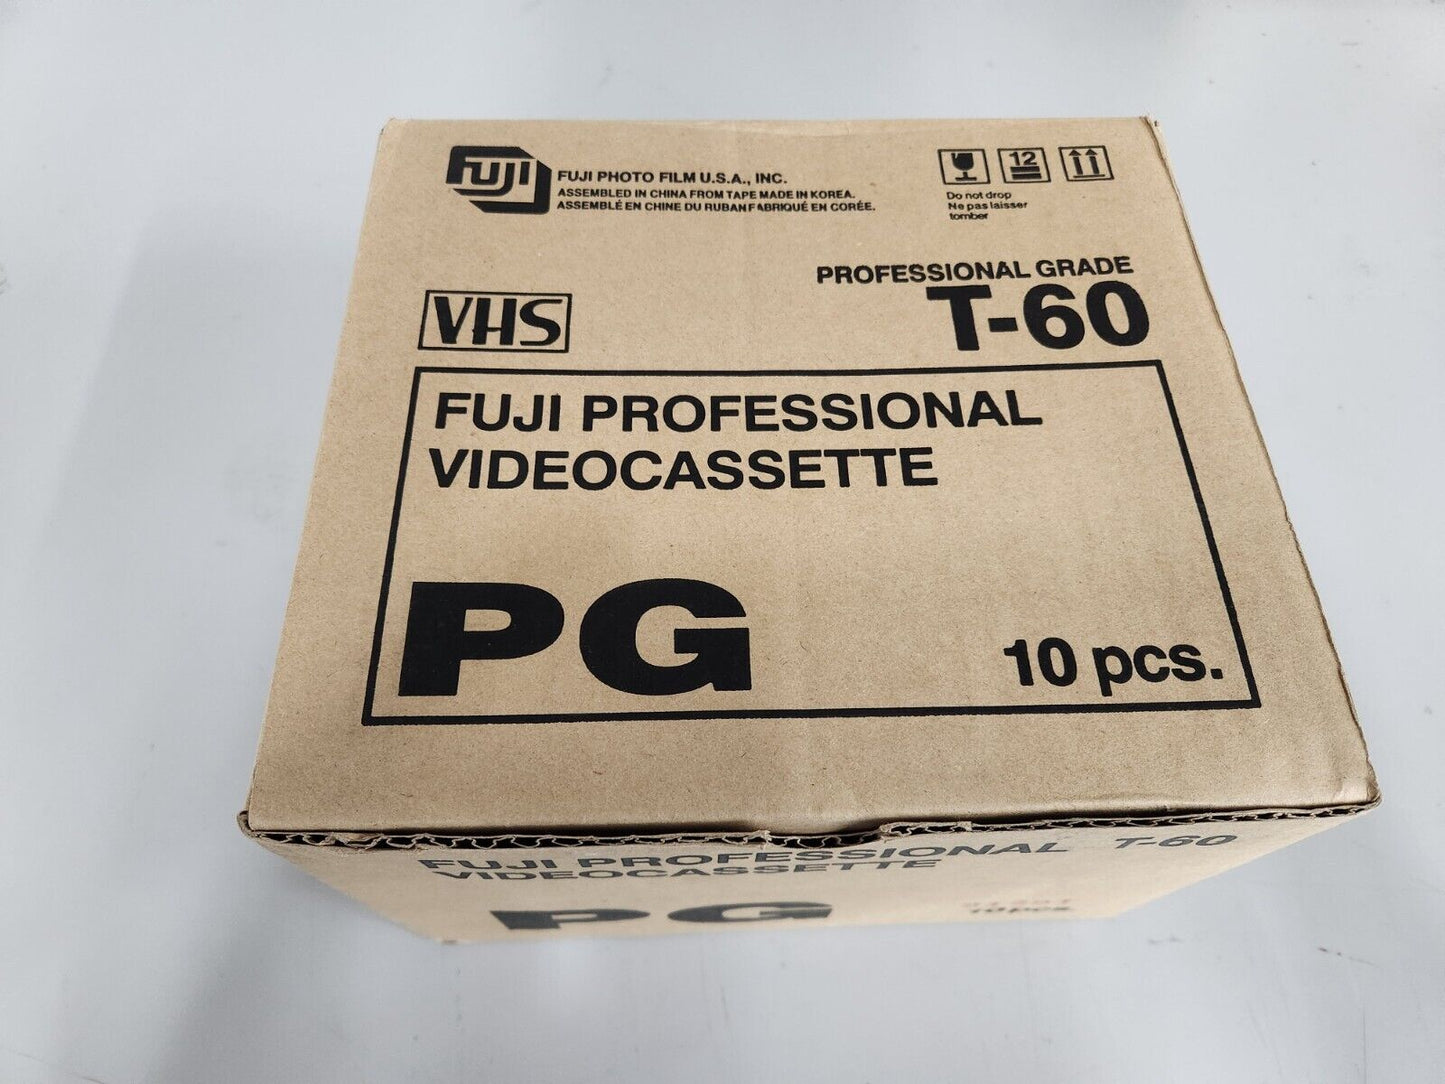 FUJI Blank Professional Grade Videocassette T-60 VHS Tapes PG Series LOT OF 10